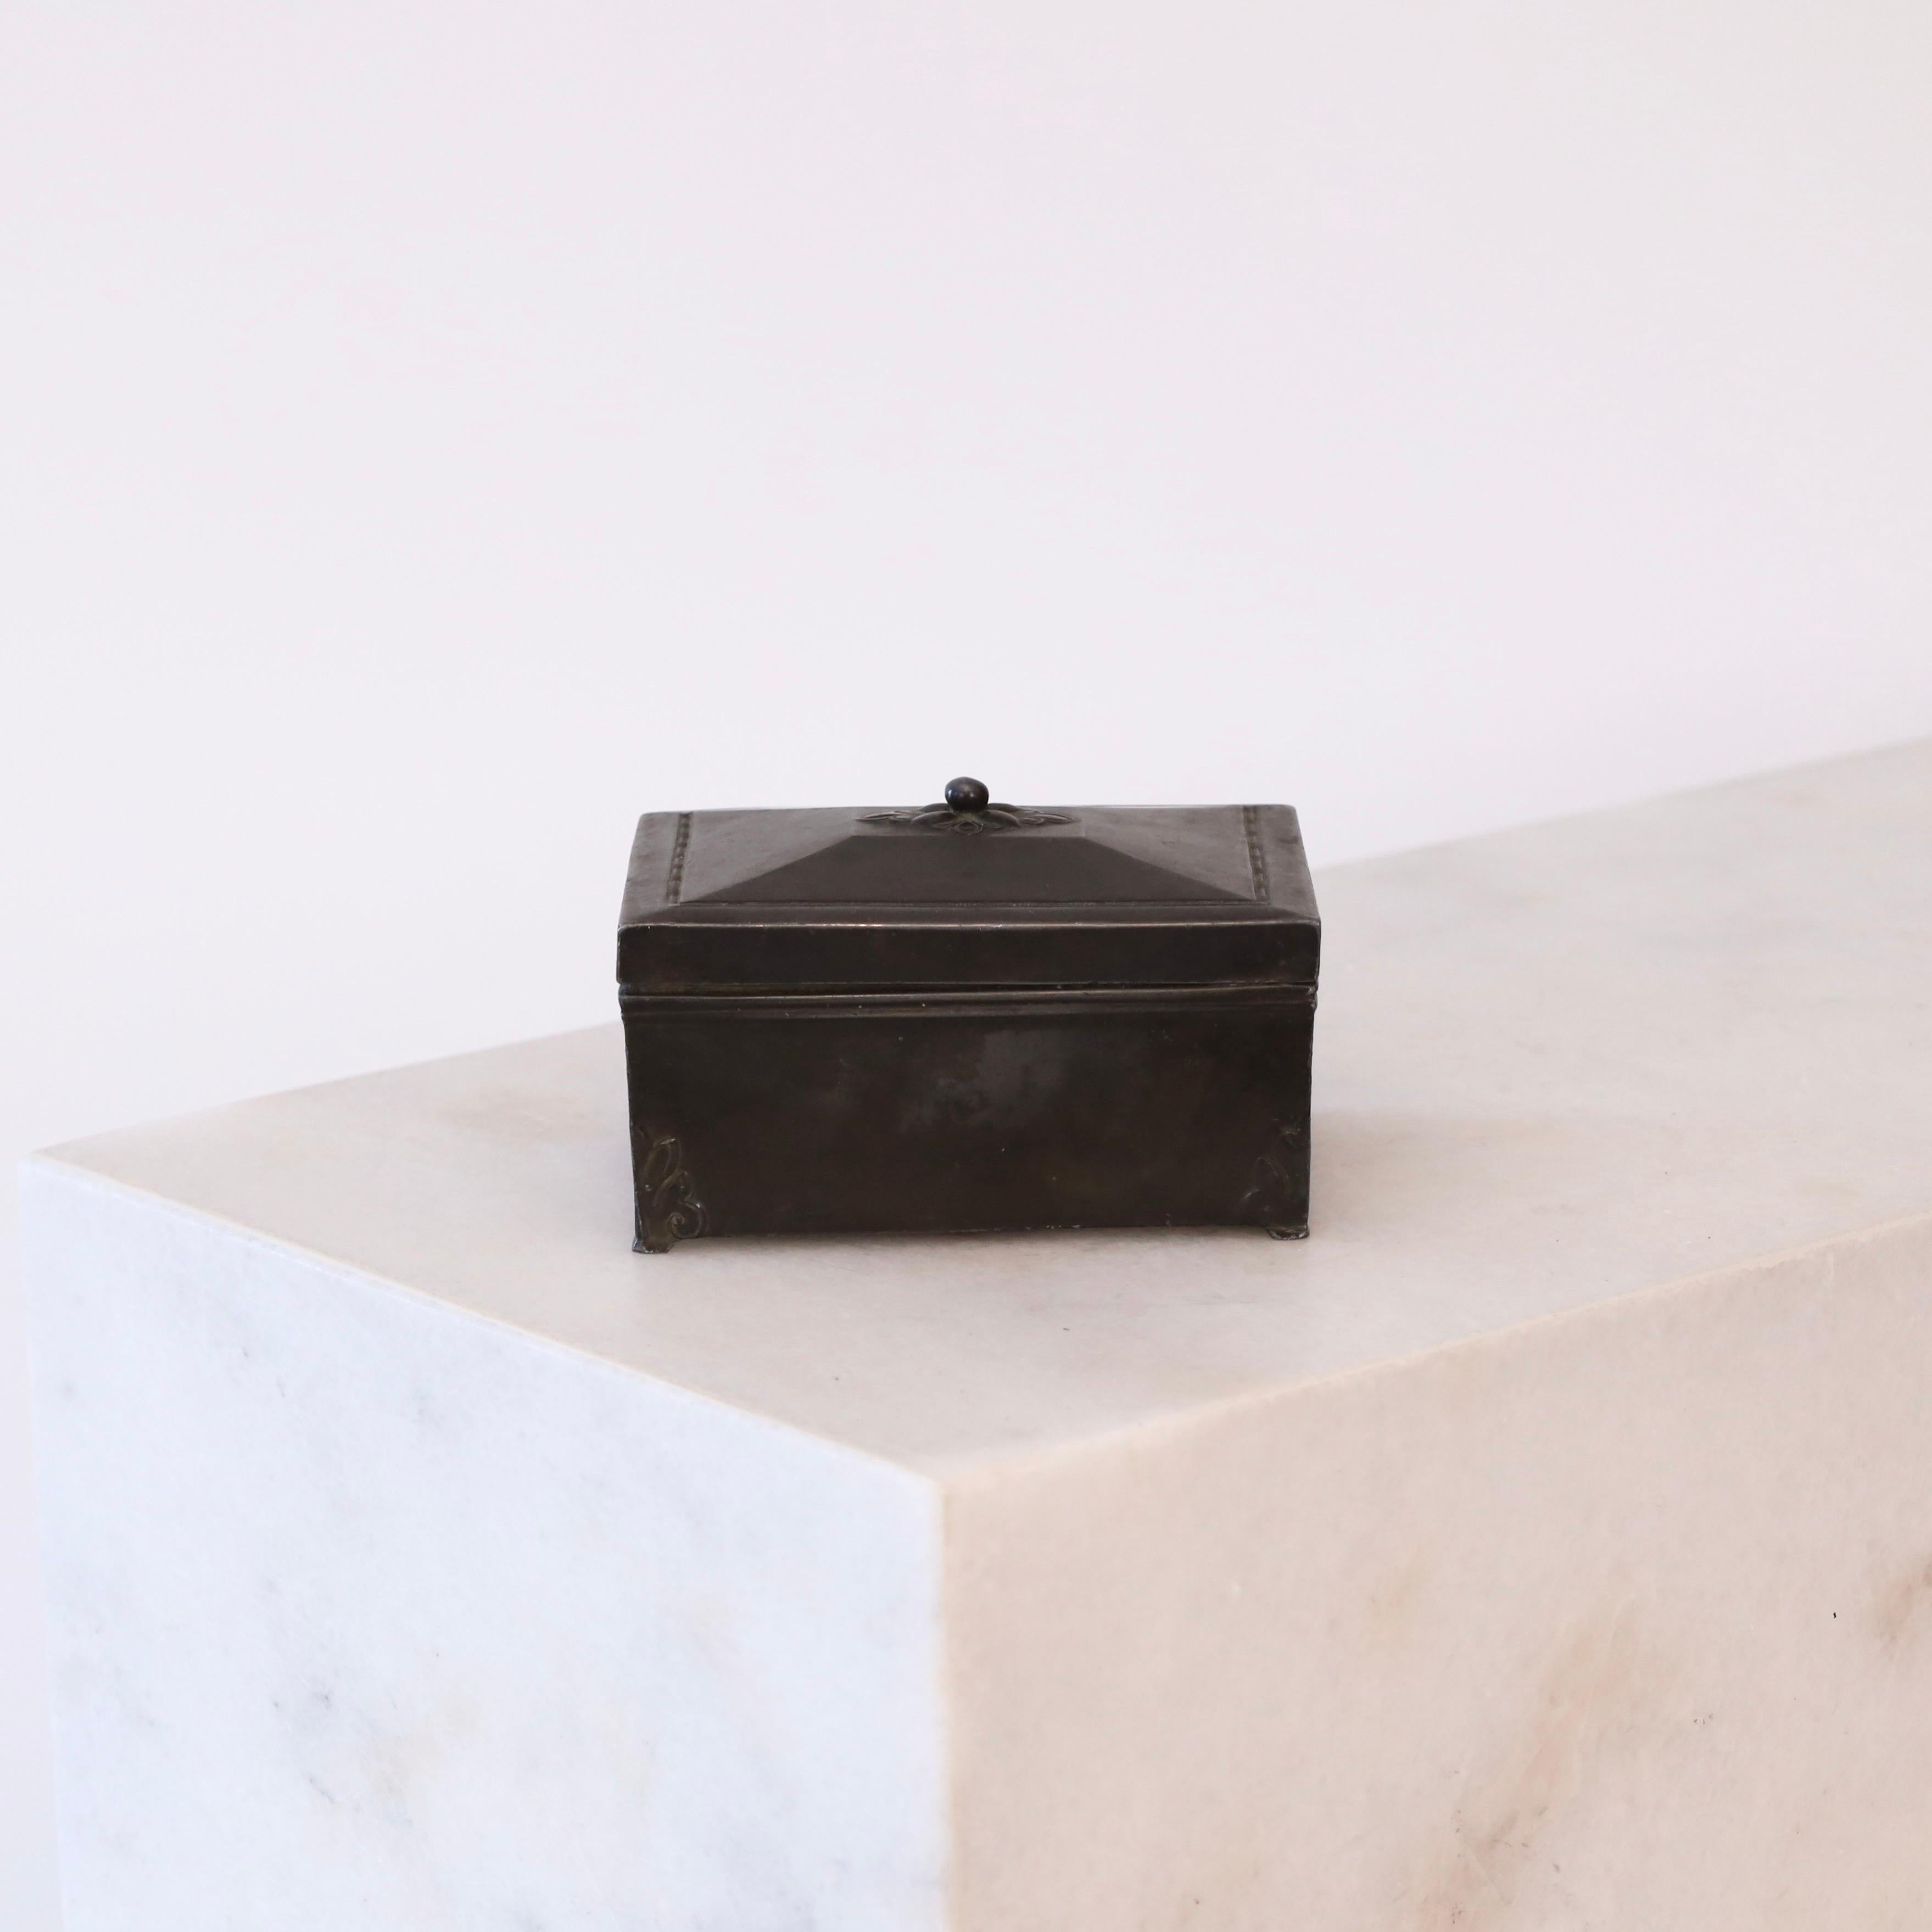 A lidded metal casket made by Just Andersen in the 1920s. It is early work by the Danish designer and a timeless piece for a beautiful home. 

* A metal casket / jewellery box with a inner in wood. Original cigarette box. 
* Designer: Just